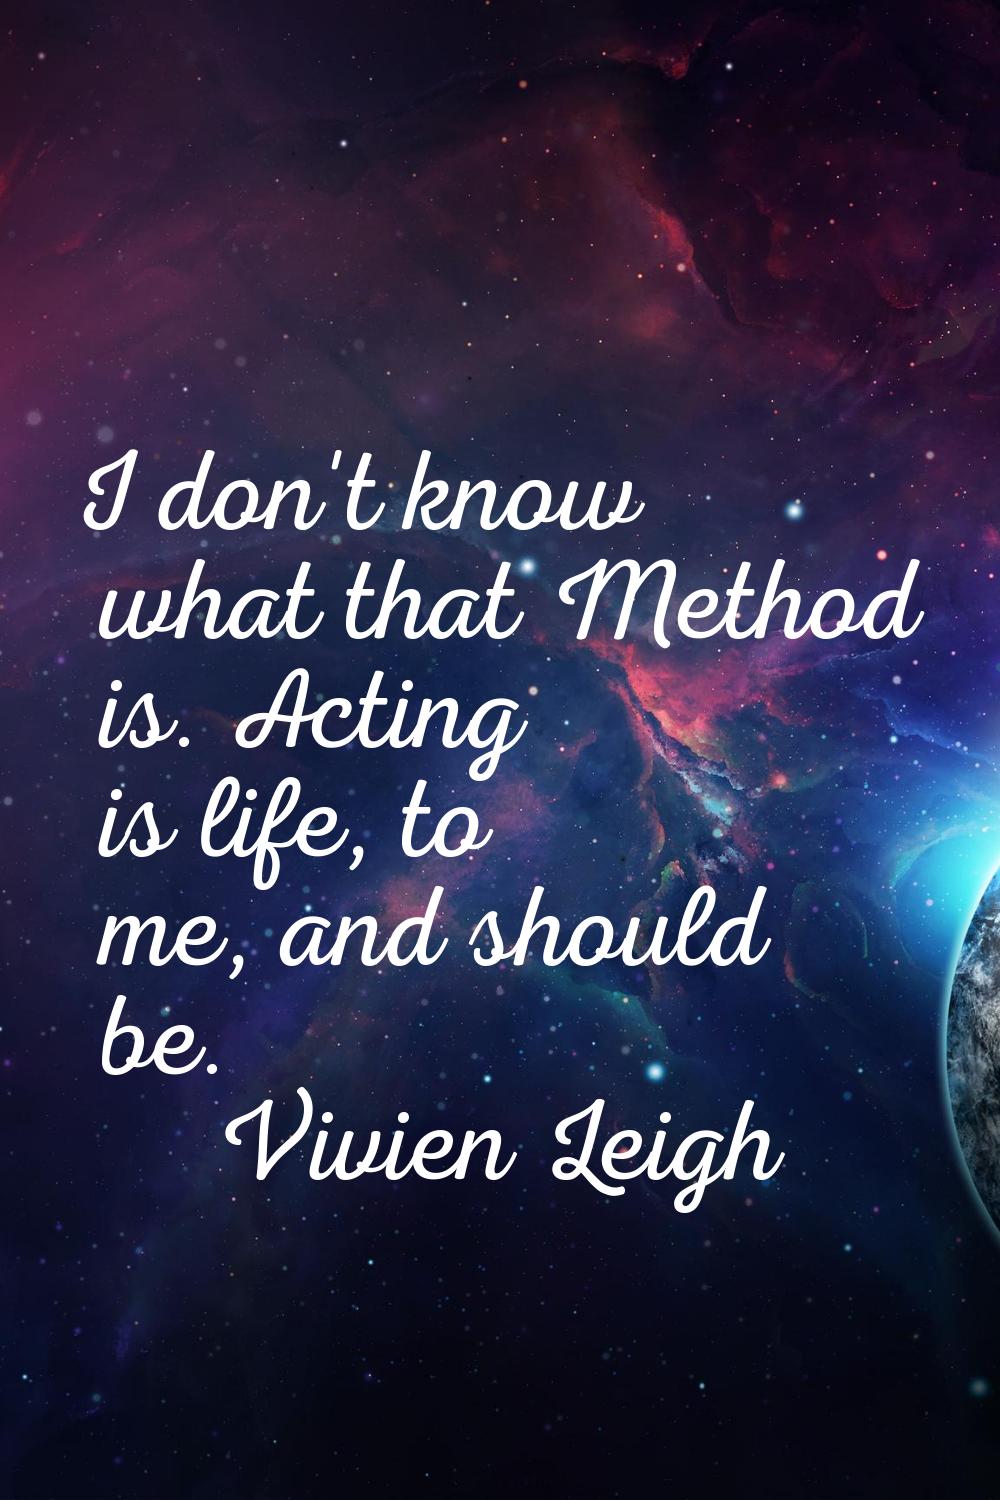 I don't know what that Method is. Acting is life, to me, and should be.